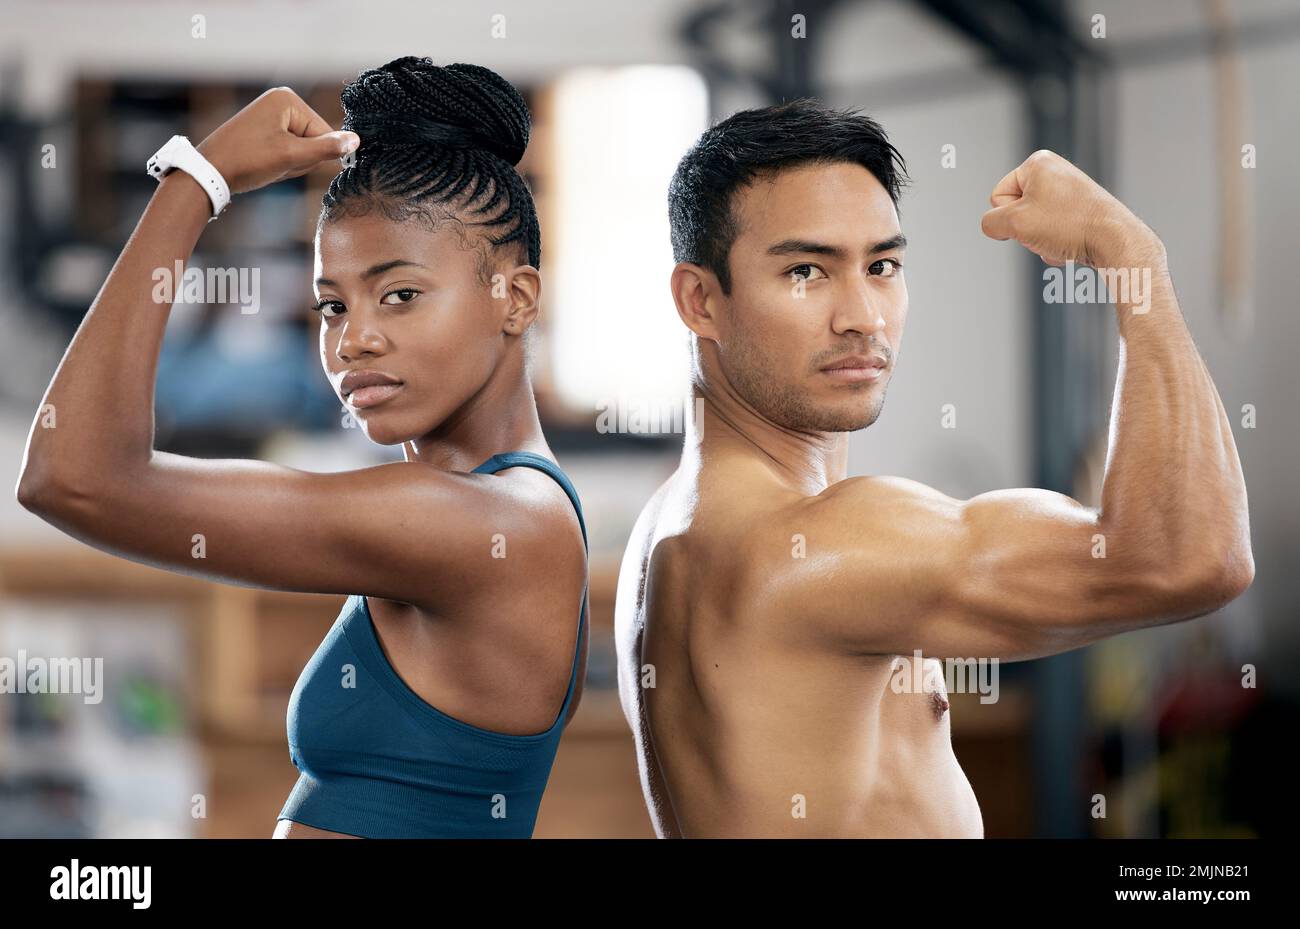 Portrait, black woman or personal trainer flexing muscles or body goals in training, workout or exercise. Fitness coaching, mindset or healthy Stock Photo